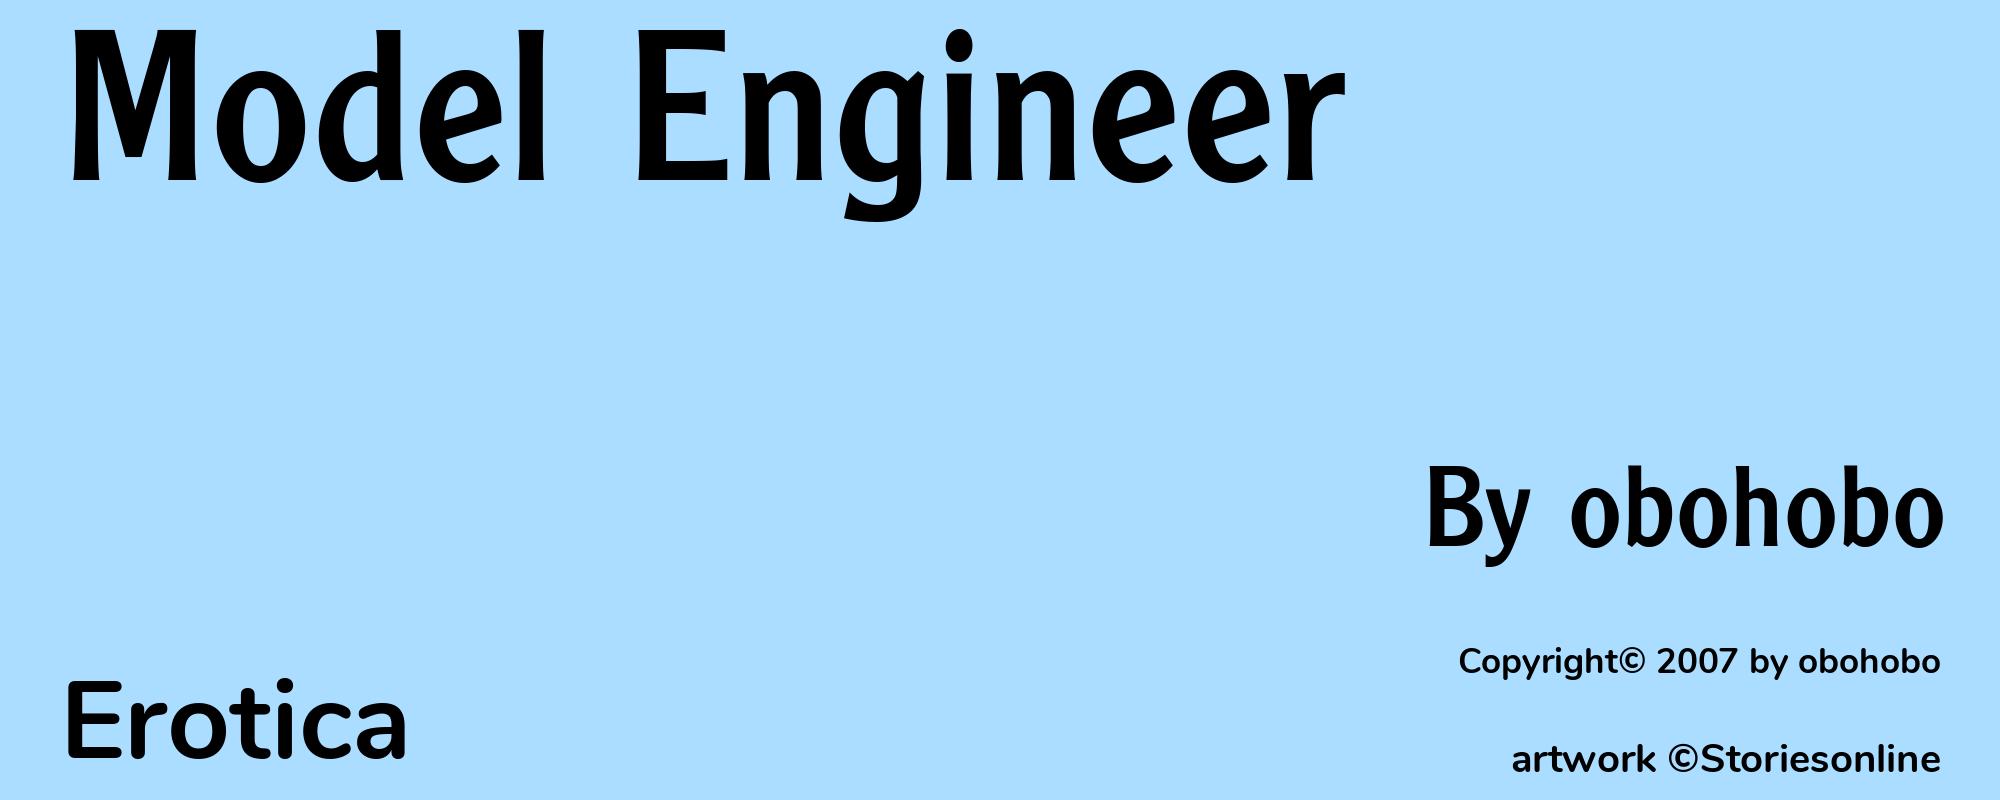 Model Engineer - Cover